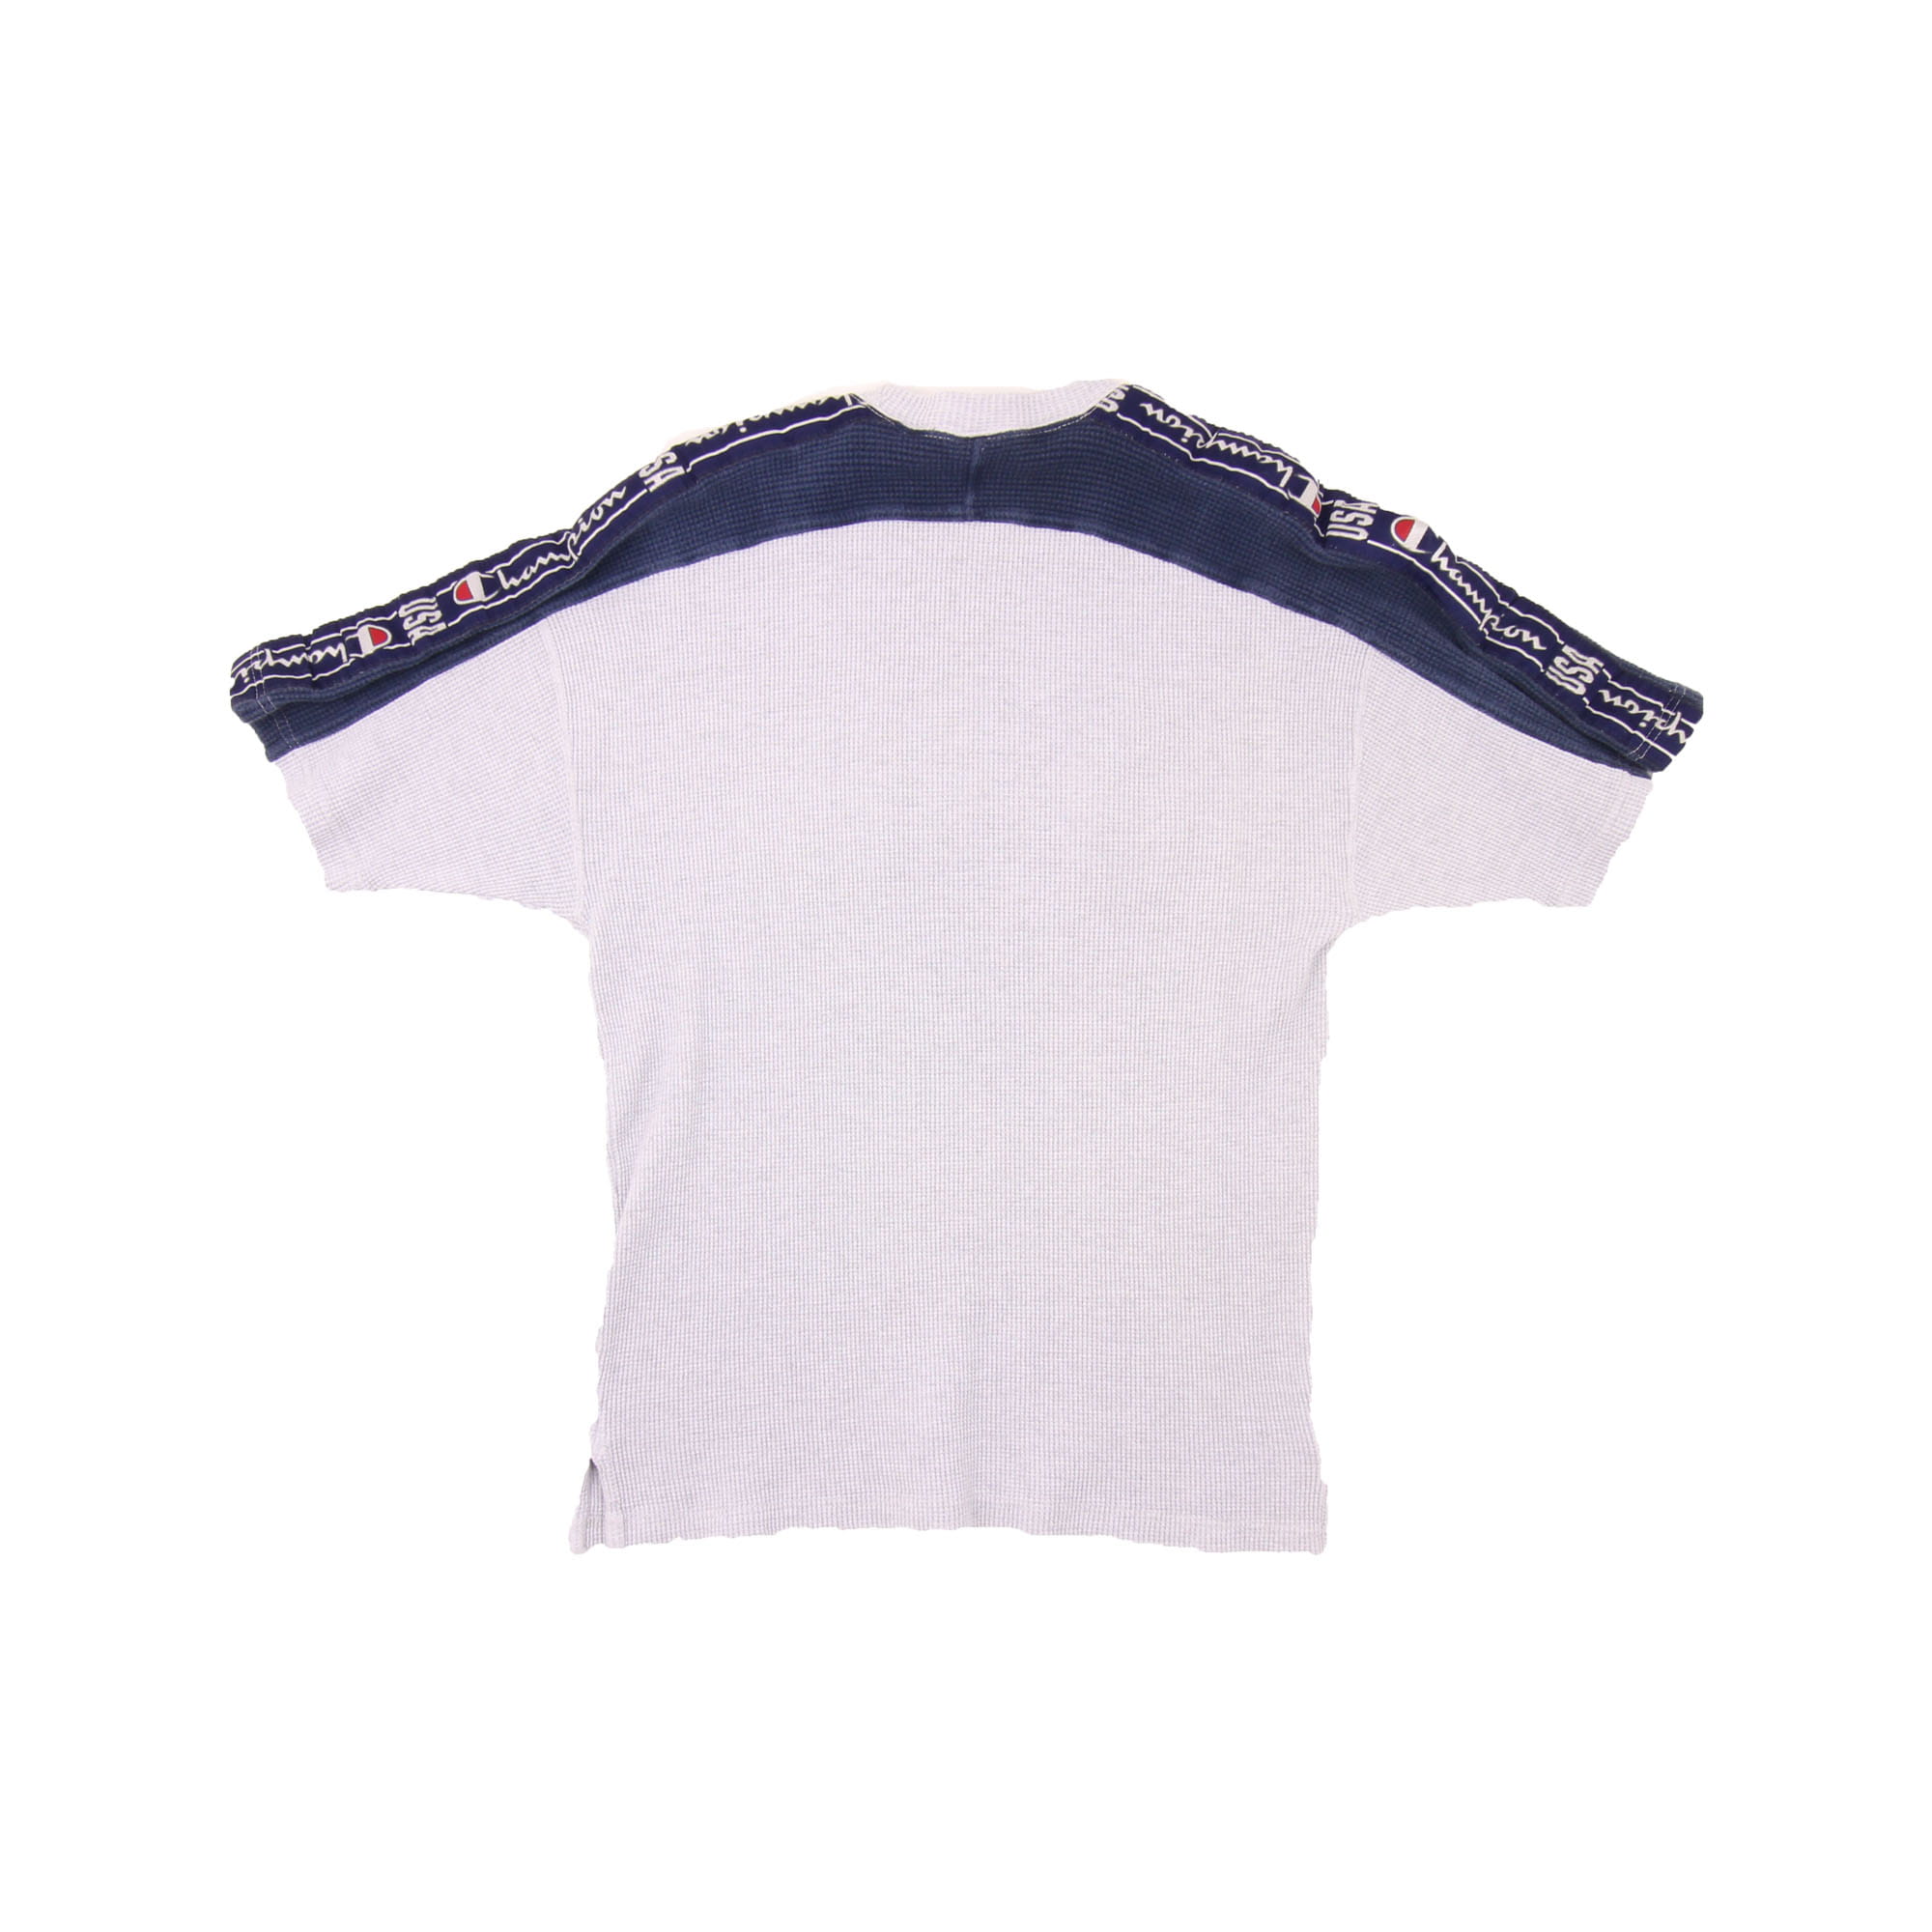 Champion Embroidered Logo T-Shirt -  S/M